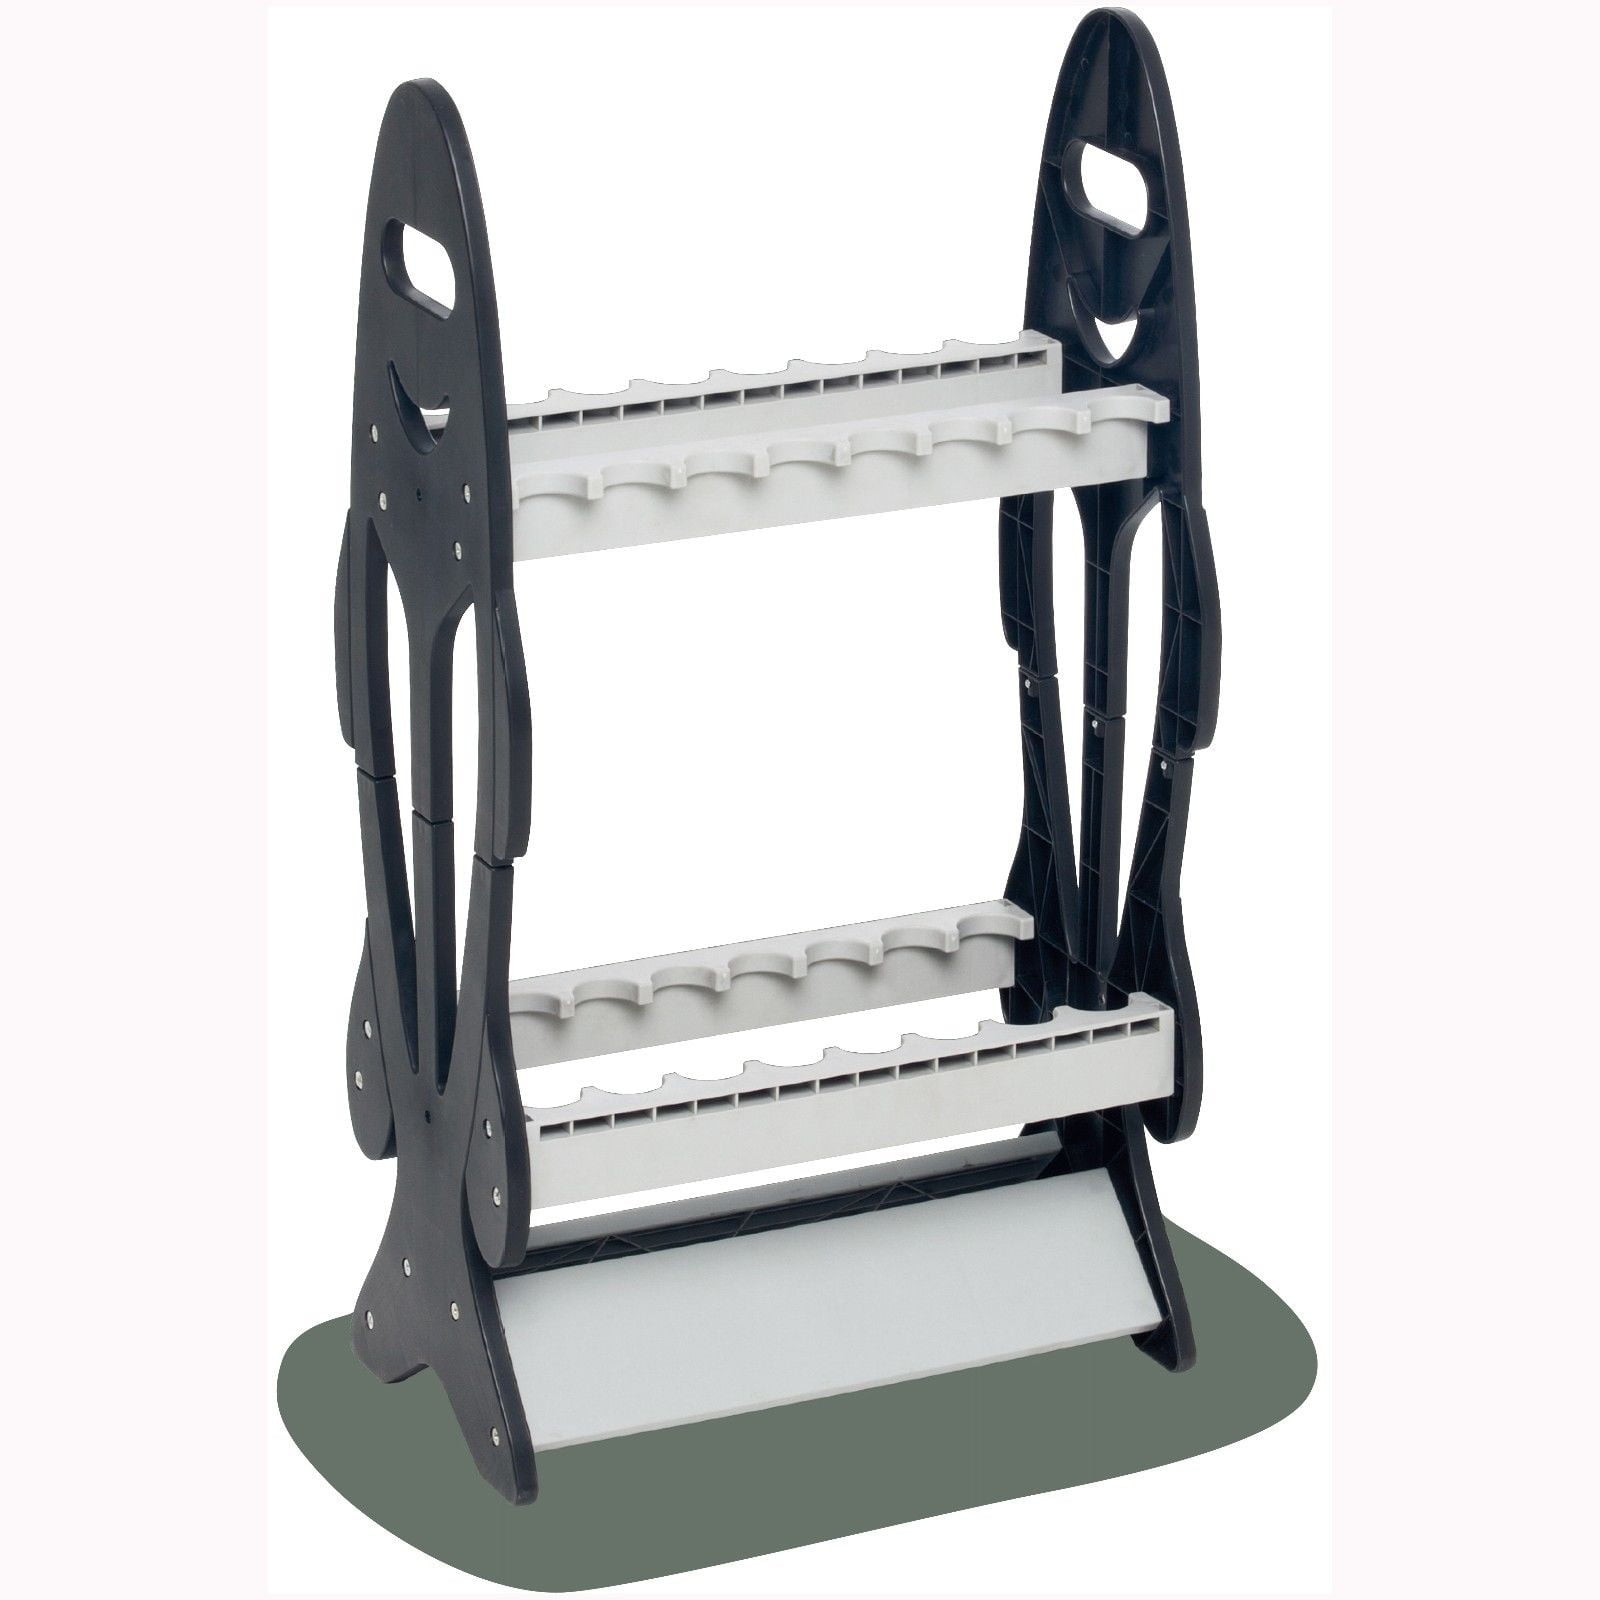 Symkmb Vertical Fishing Rod Holders,Wall Mounted Fishing Rod Racks for  Garage, Fits Most Of Fishing Rods 